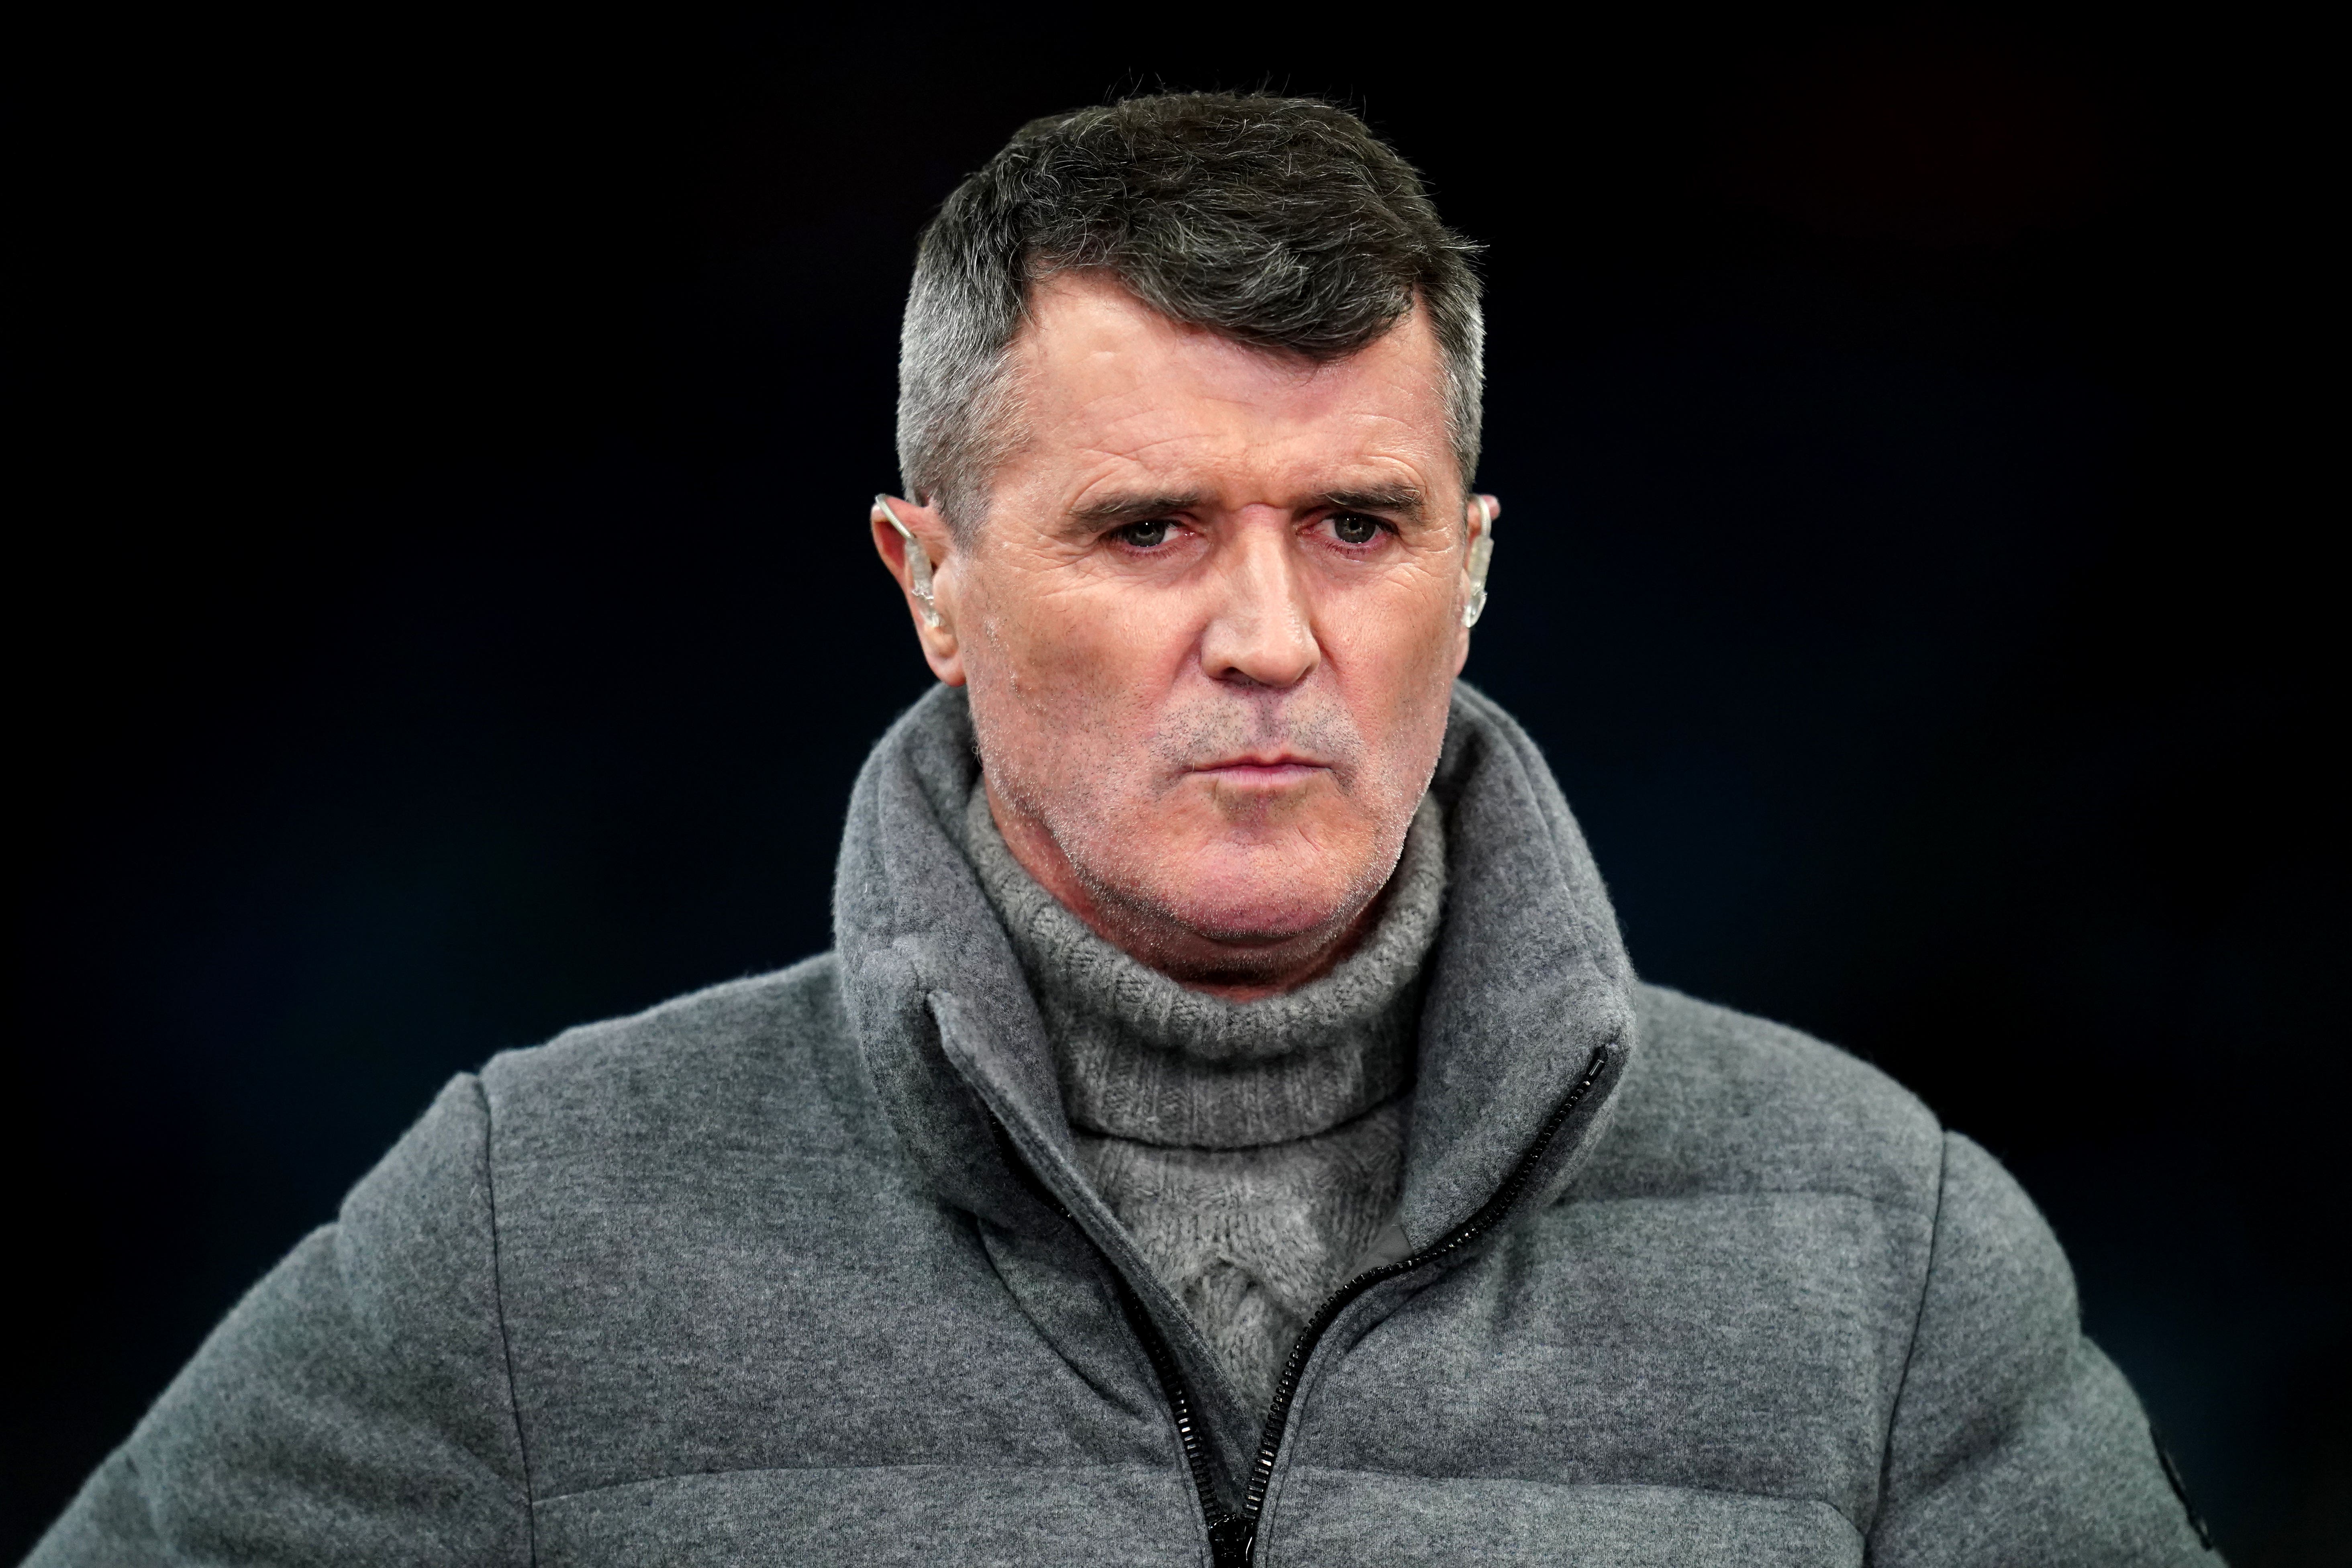 Roy Keane was working as a pundit during the football match